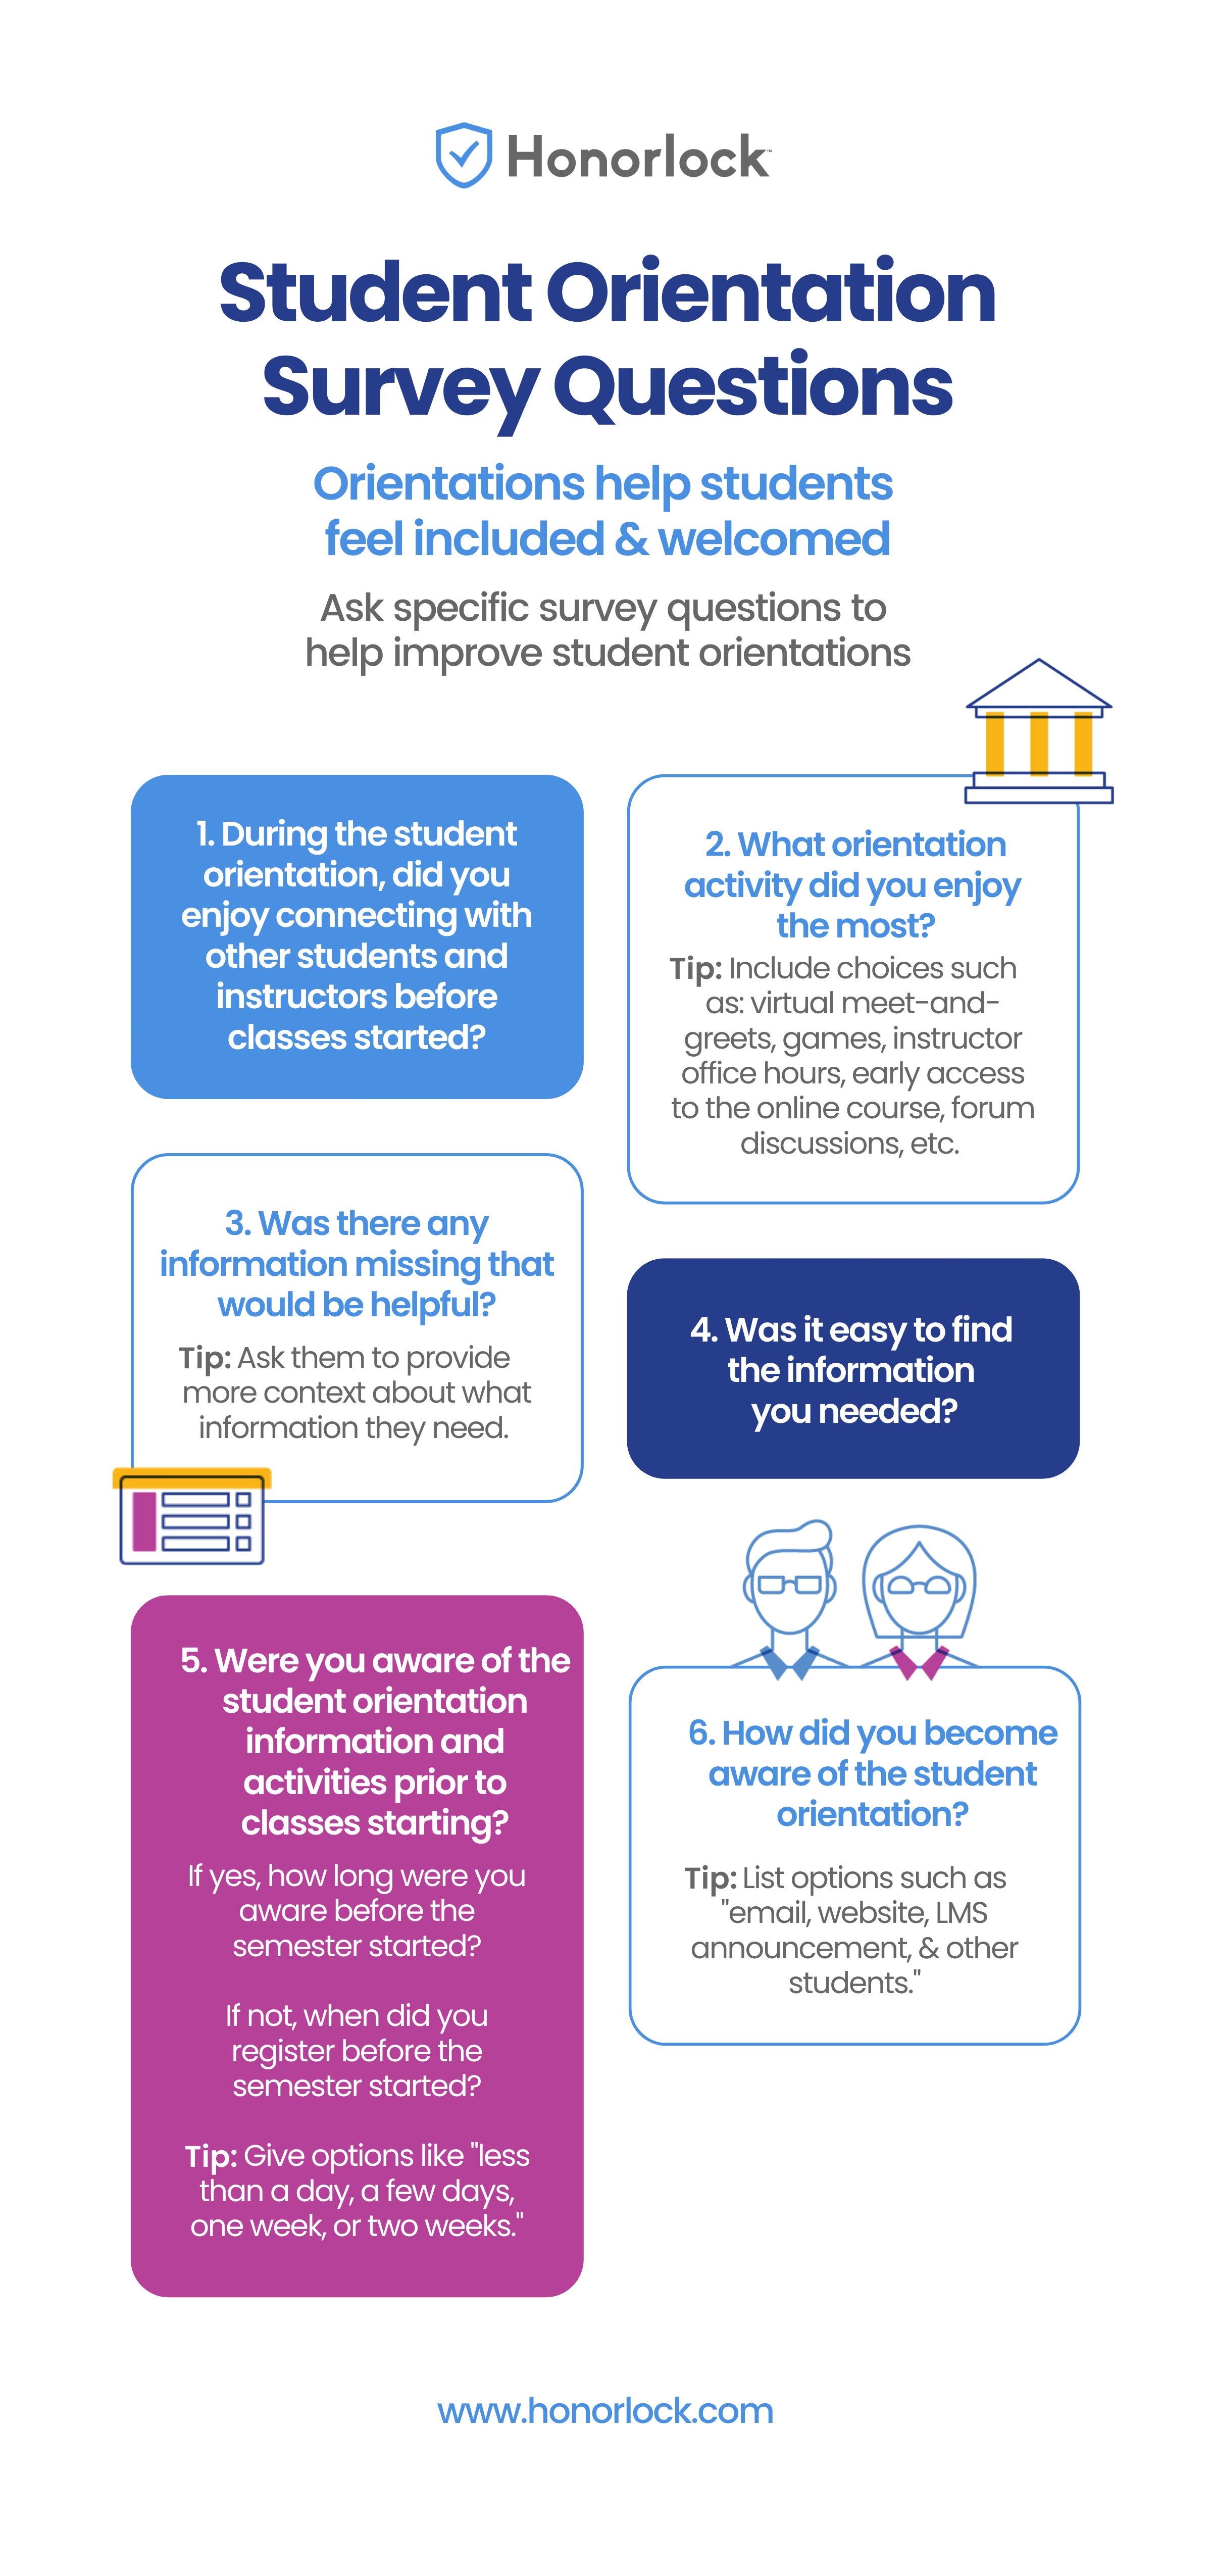 Student Orientation Survey Questions for DEI in Higher Ed